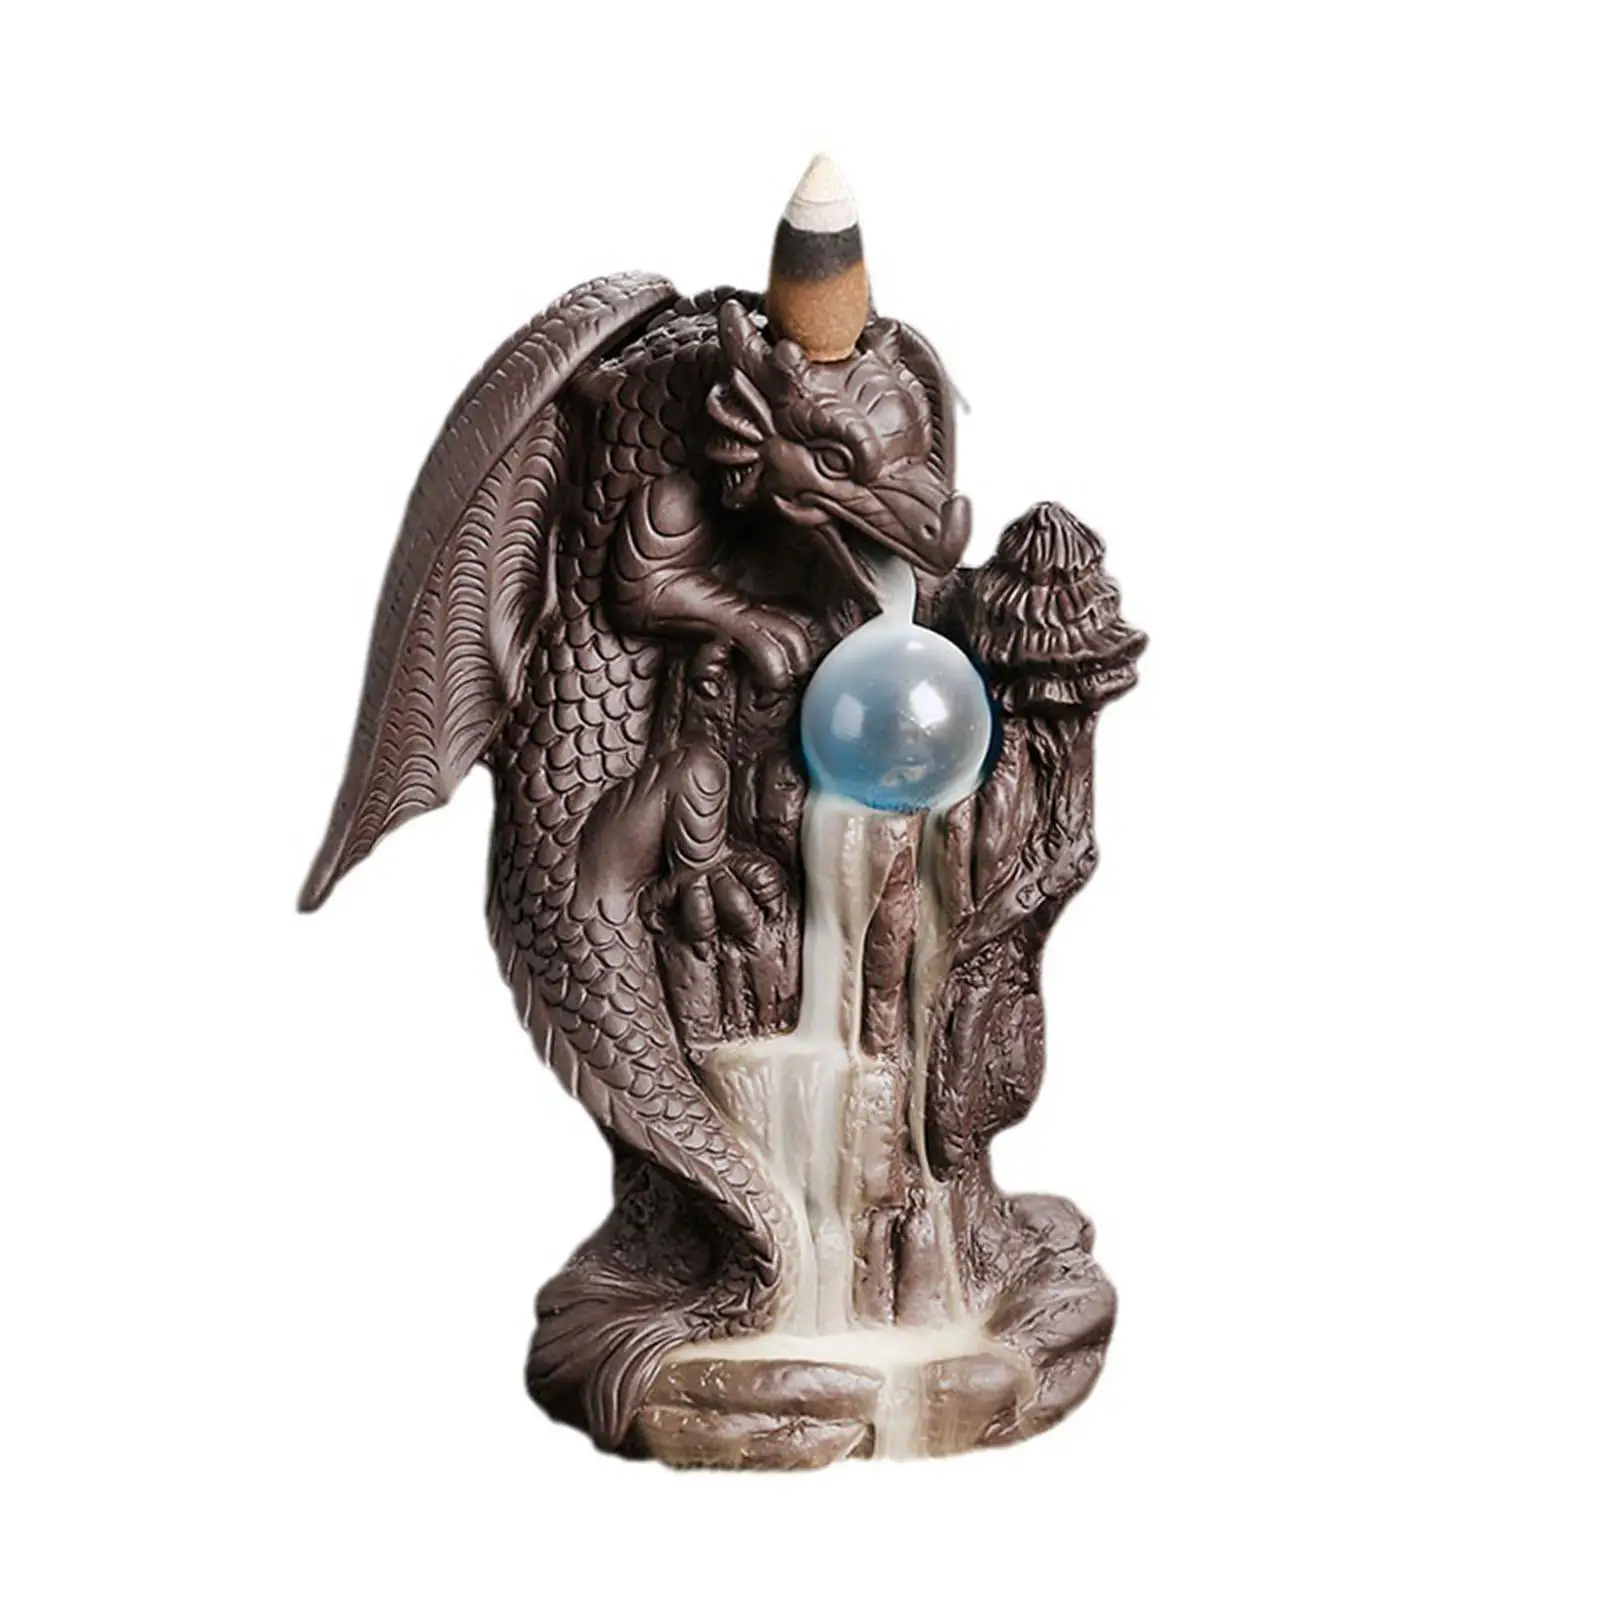 Waterfall Backflow Incense Holder Home Decoration Decor Room Decor Ornament for Relaxation Living Room Home Office Desktop